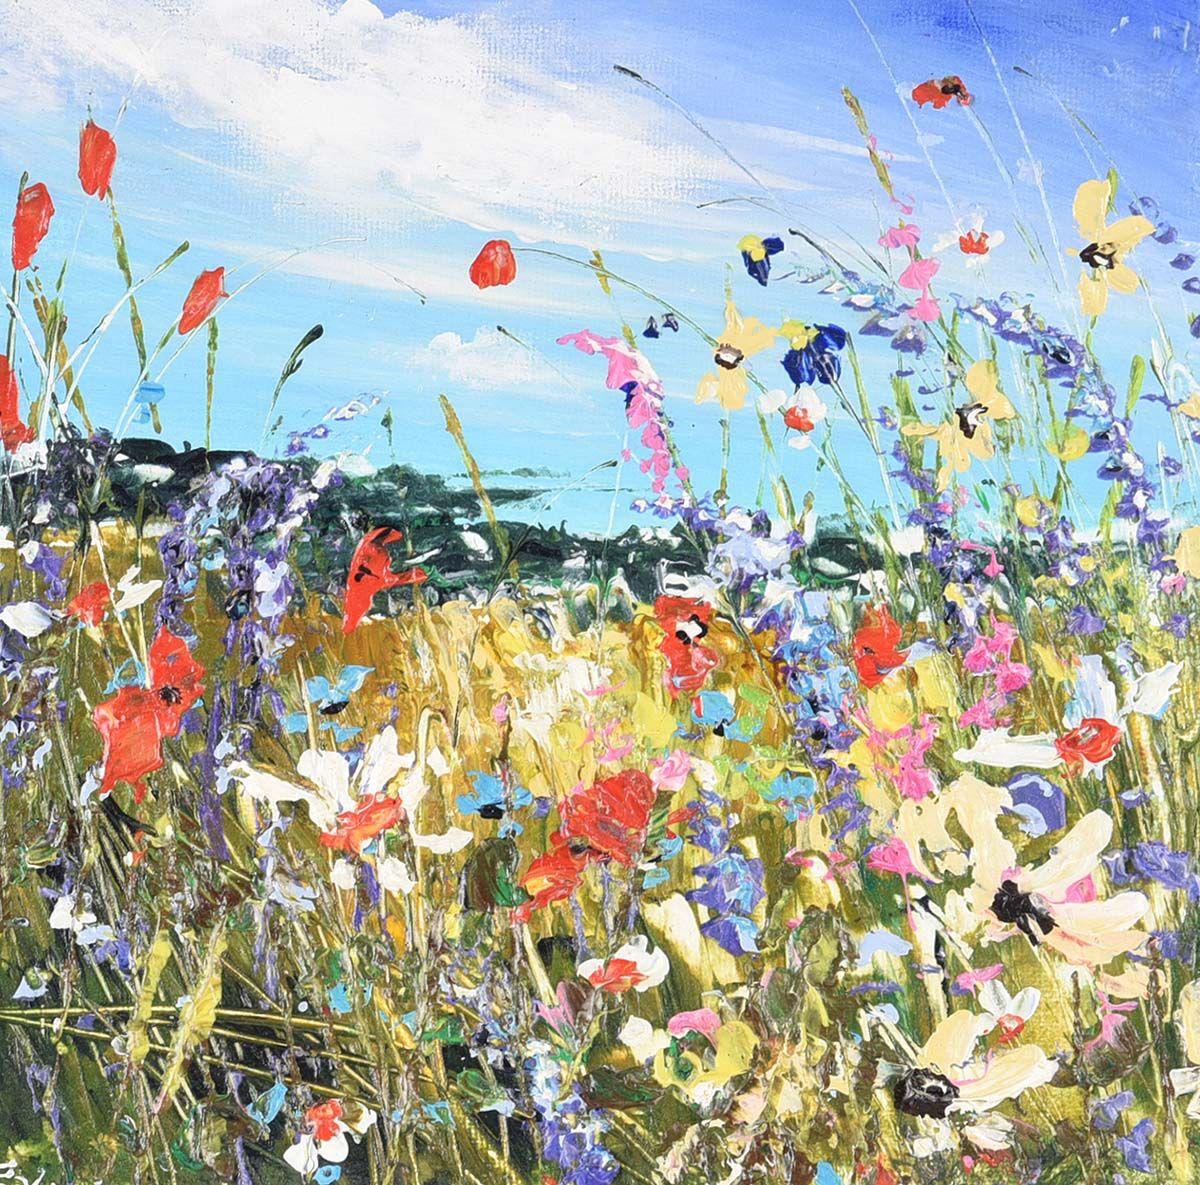 Evelina Vine Landscape Painting - Colourful Impasto Wild Flower Meadow Painting by Contemporary British Artist